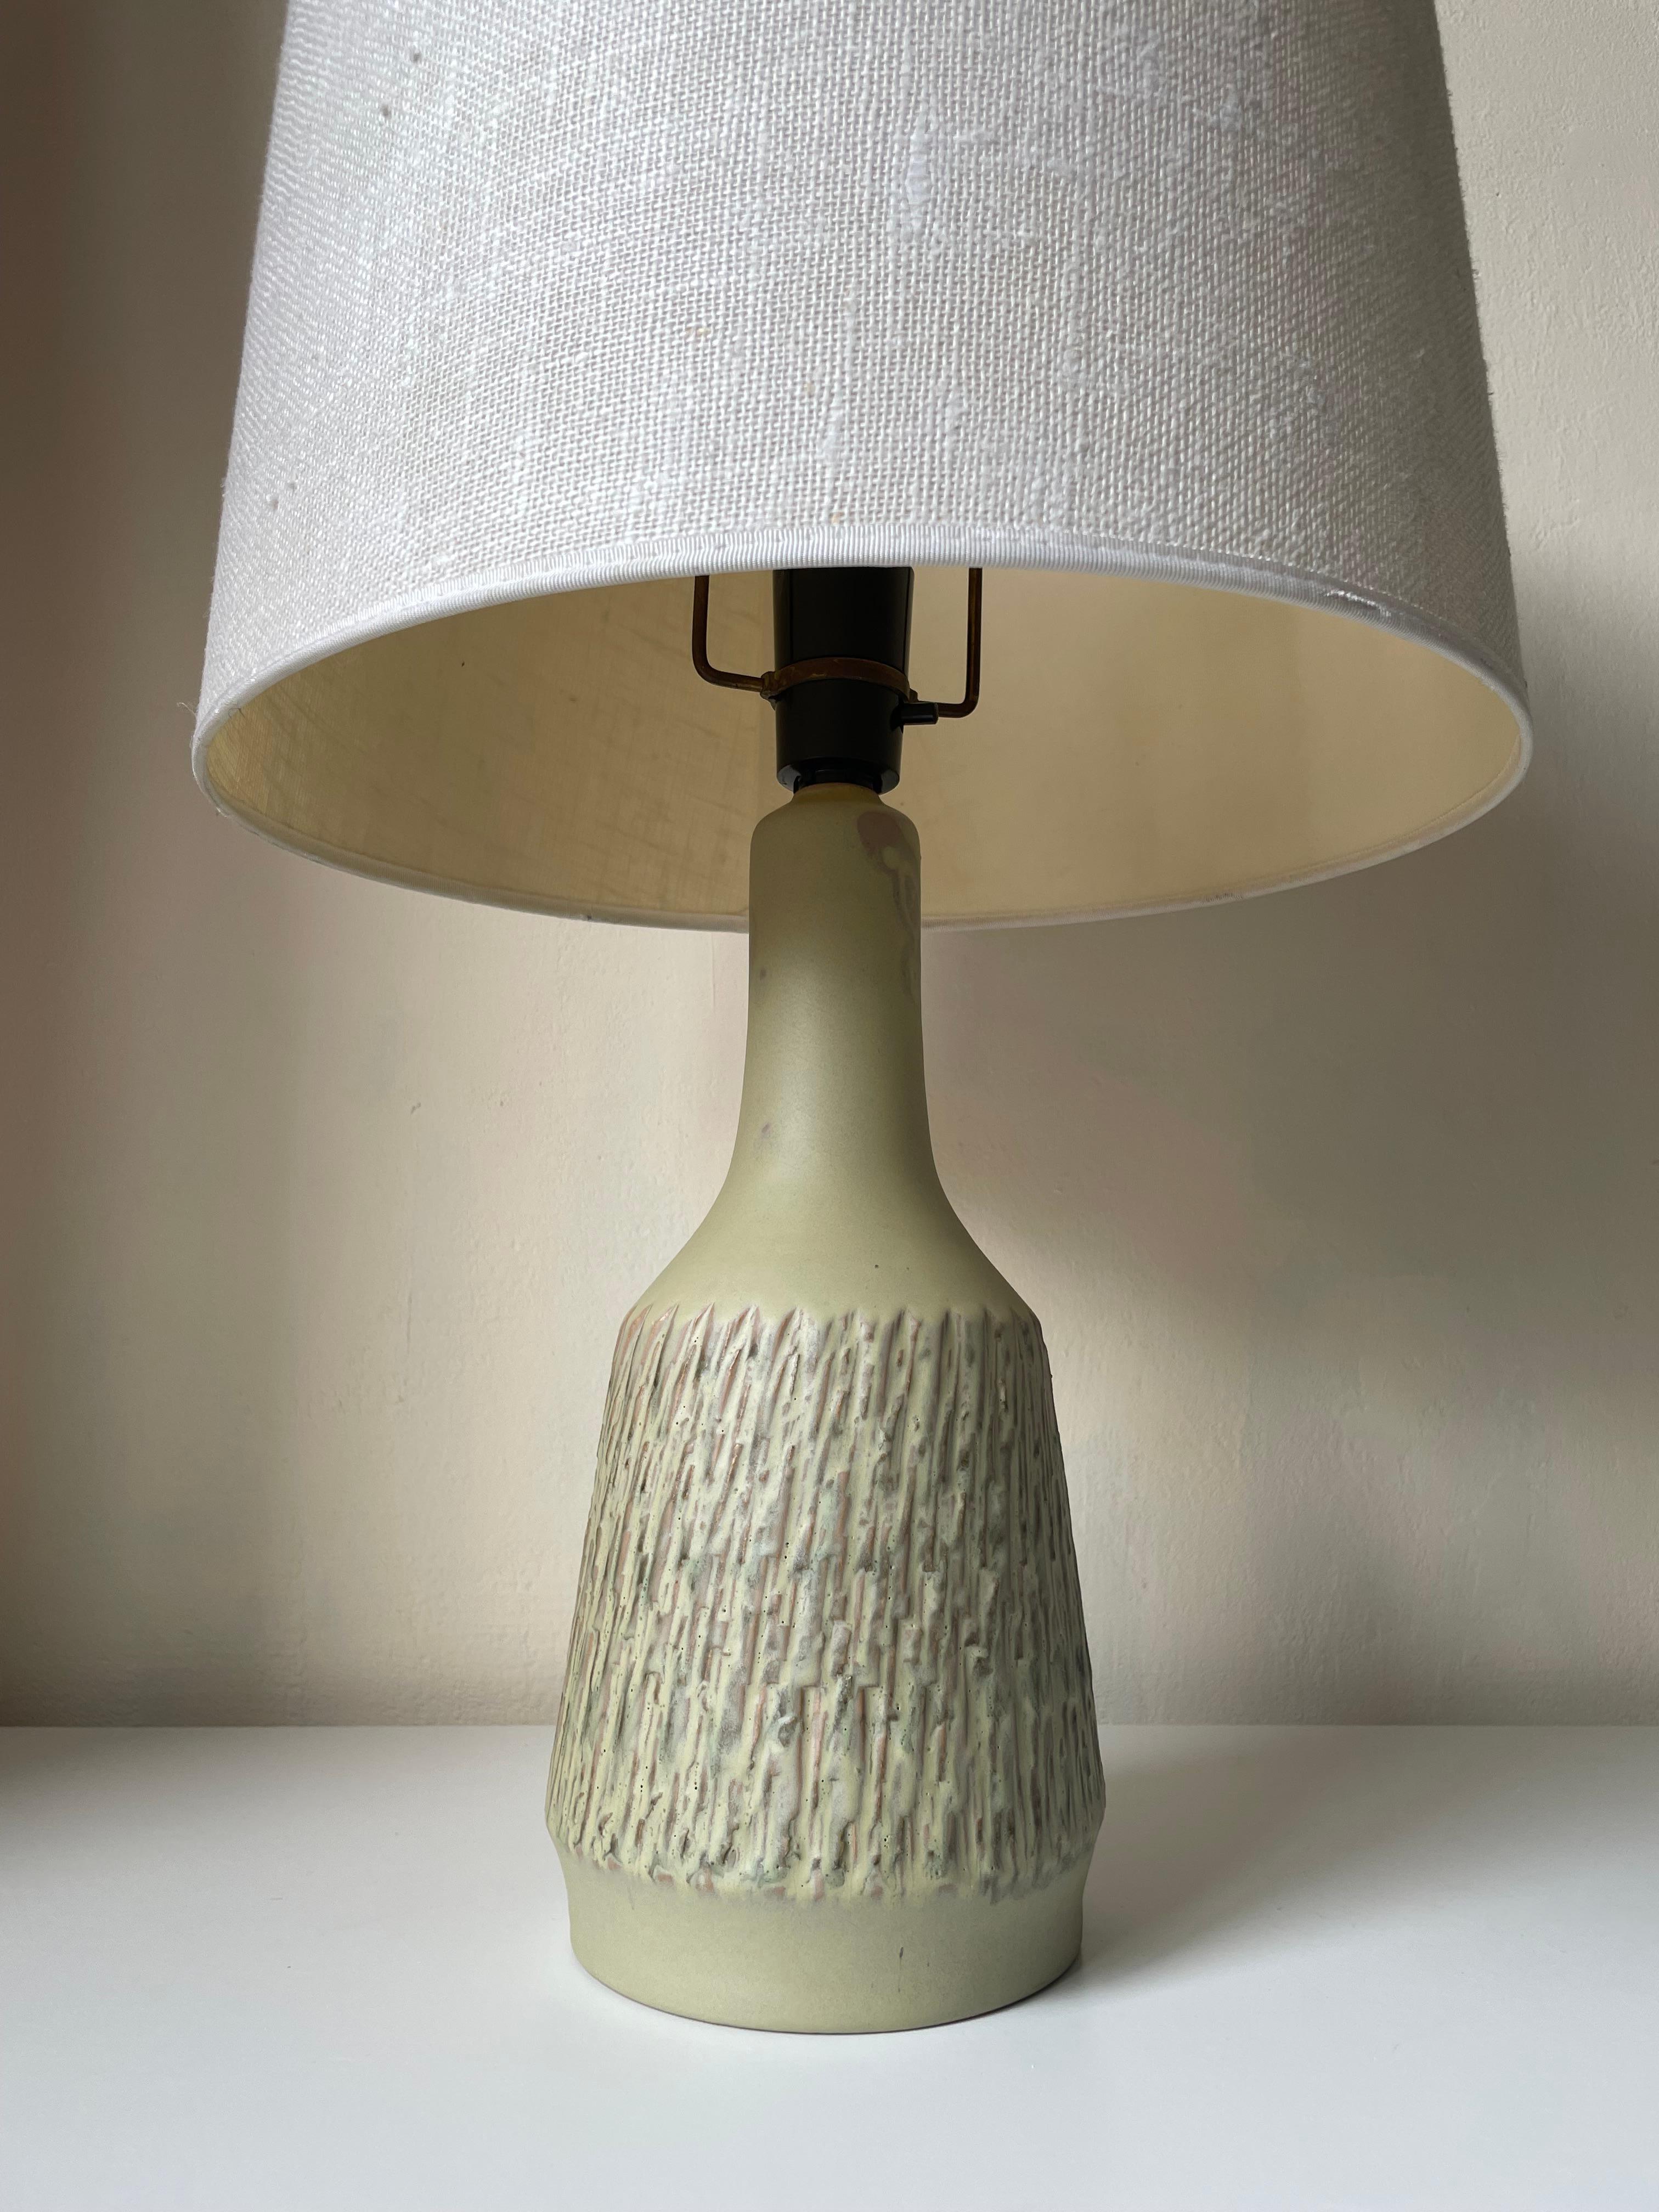 Hand-Carved Light Green Textured Ceramic Table Lamp, 1960s For Sale